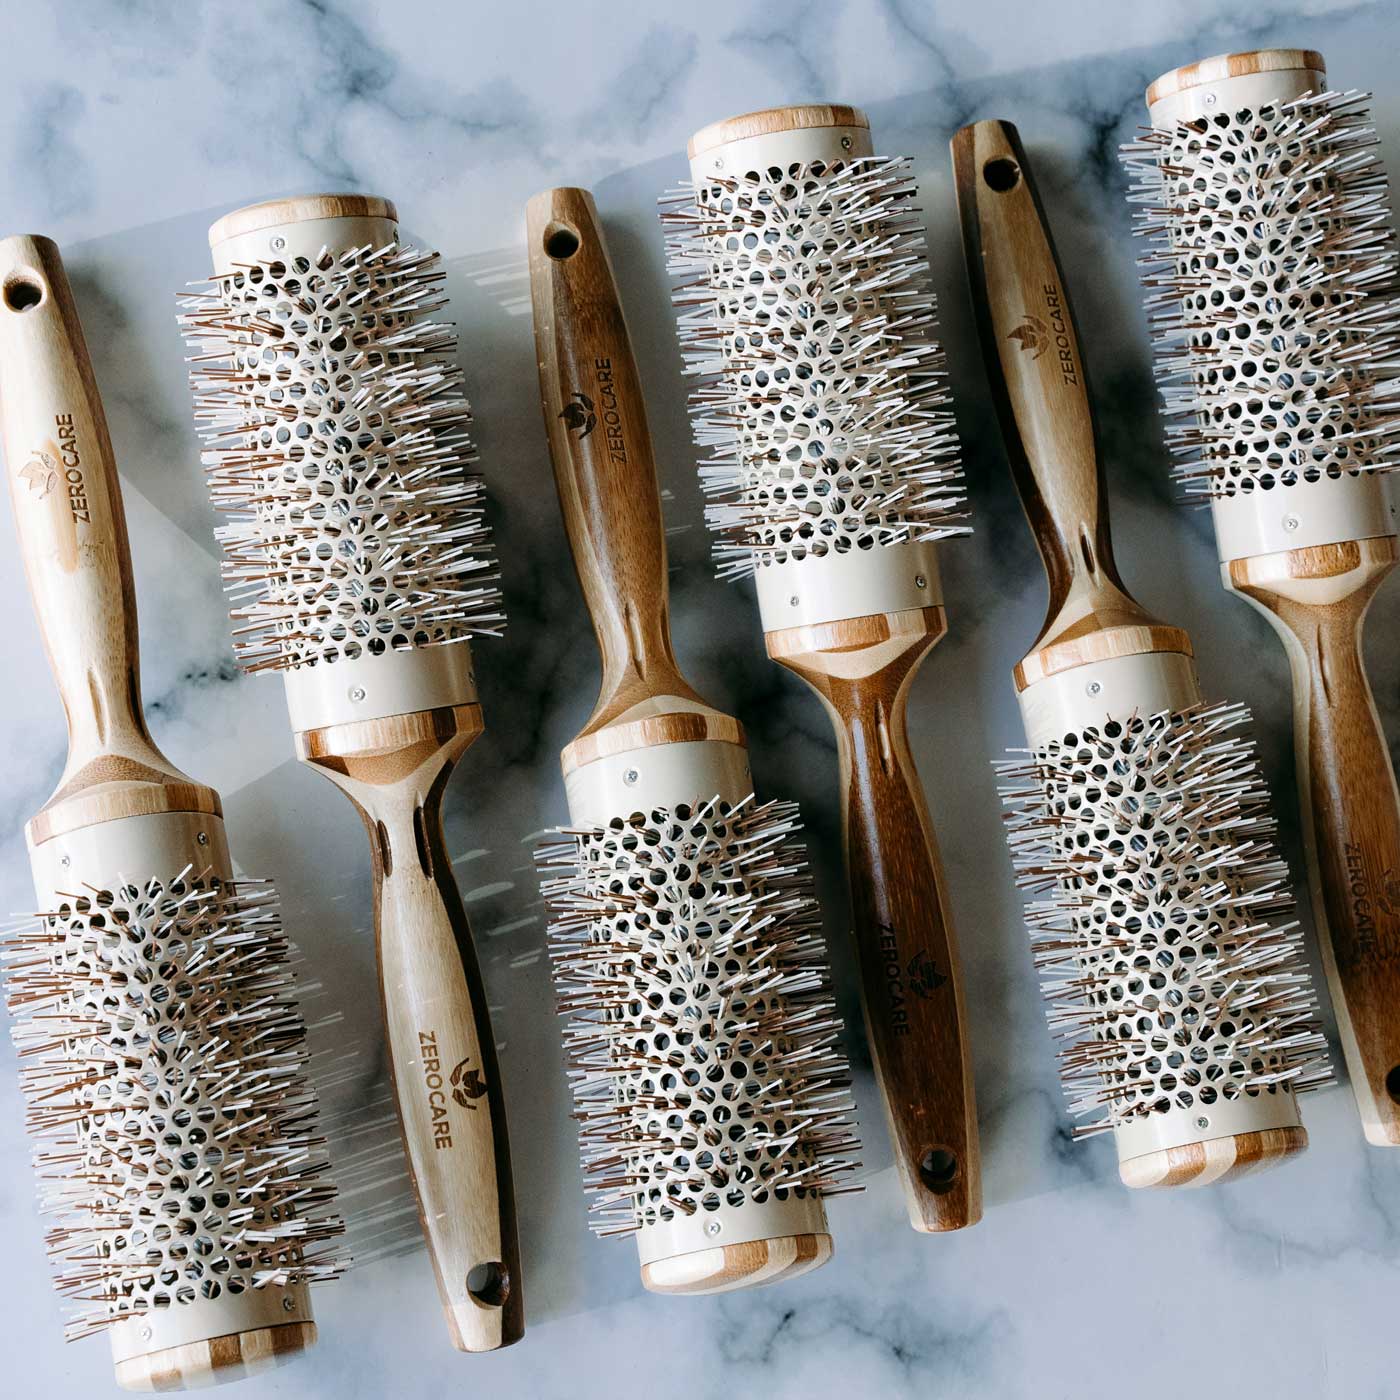 6 zerocare sustainable eco thermal brushes